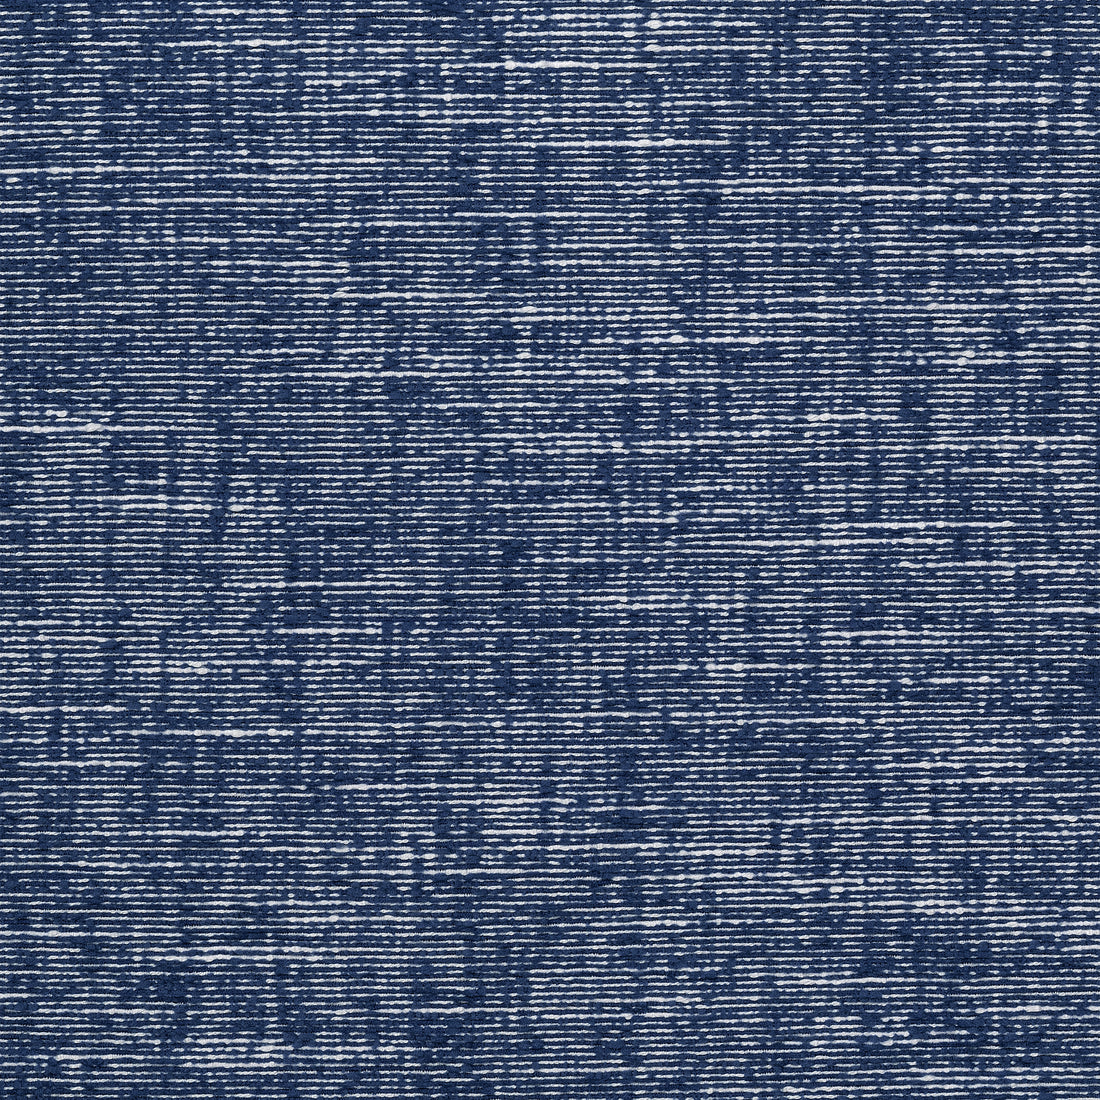 Freeport fabric in navy color - pattern number W74611 - by Thibaut in the Festival collection